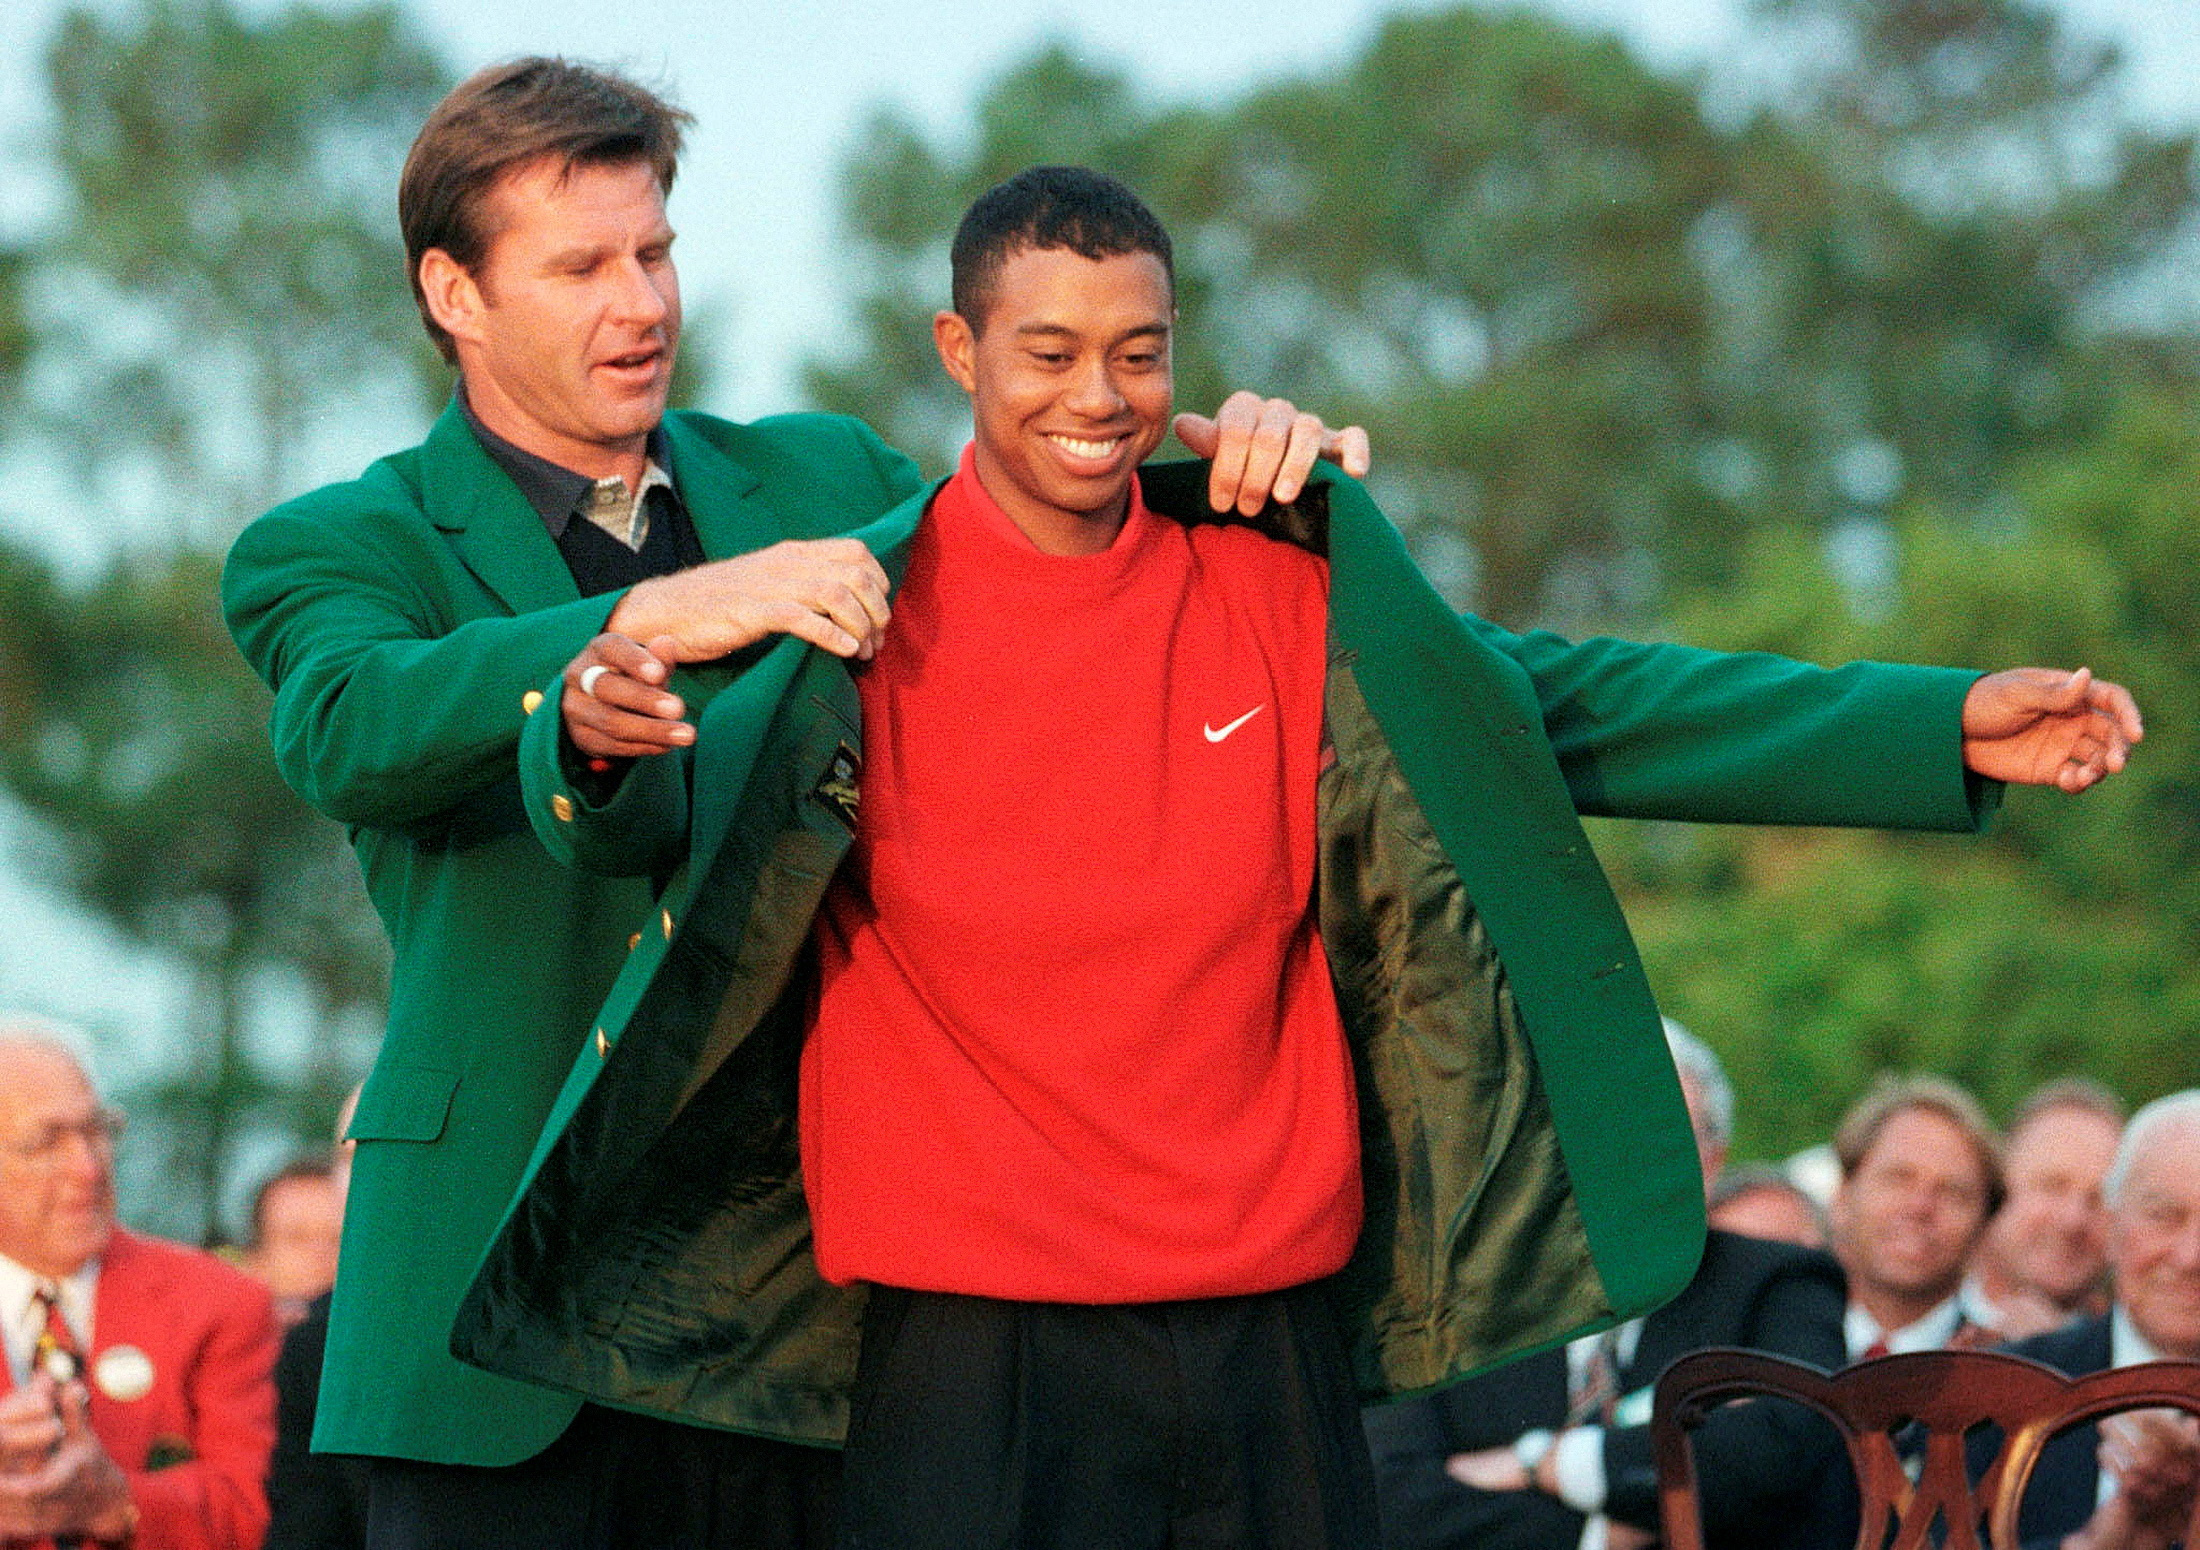 Woods' ball from 1997 Masters sells for $64,000 | Reuters